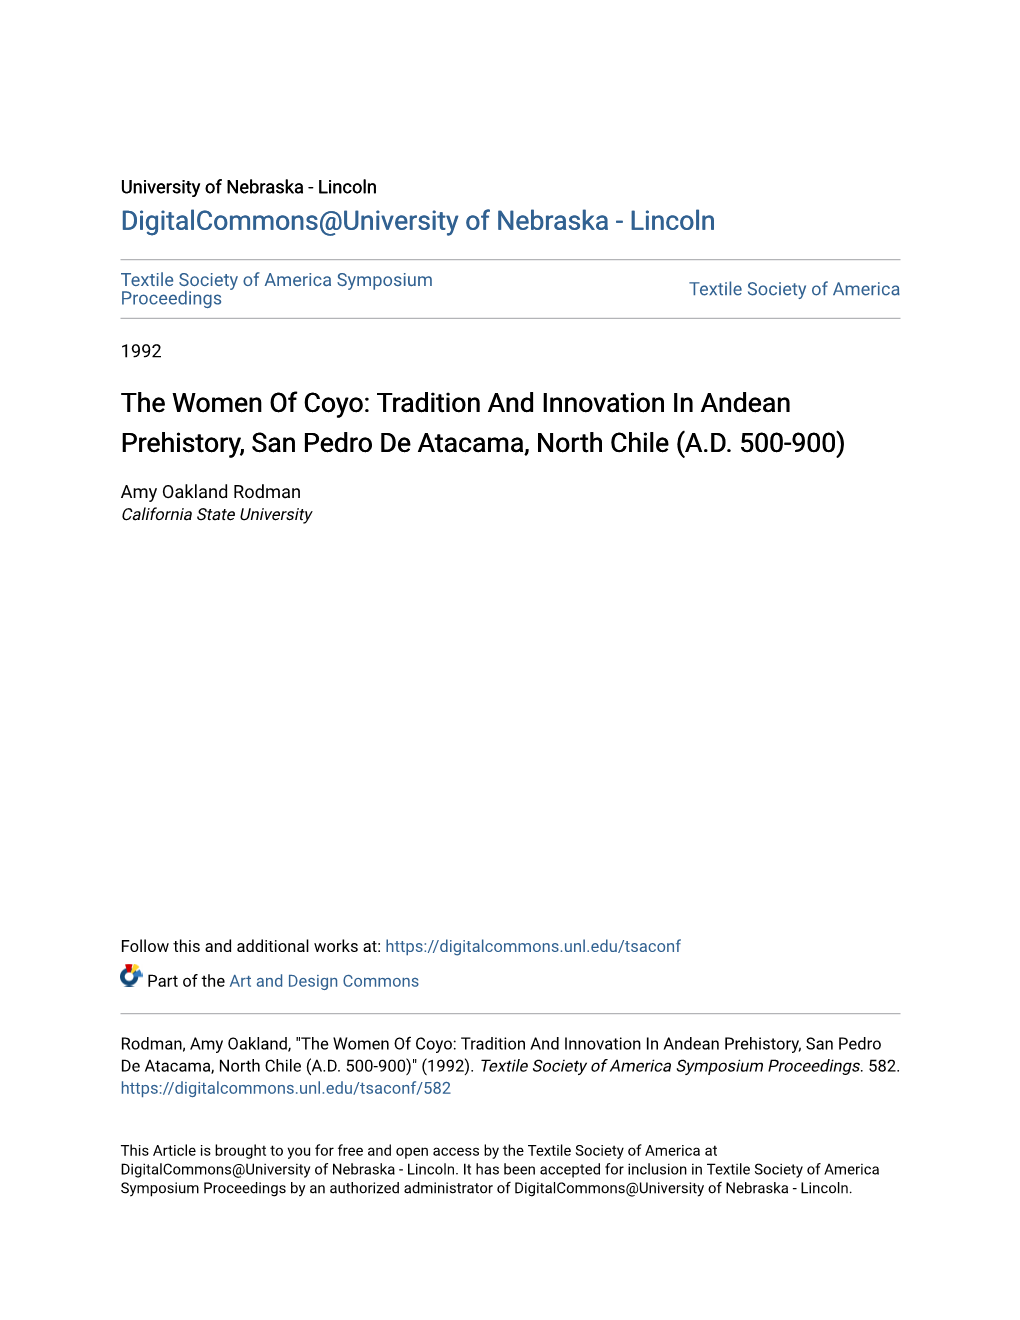 The Women of Coyo: Tradition and Innovation in Andean Prehistory, San Pedro De Atacama, North Chile (A.D